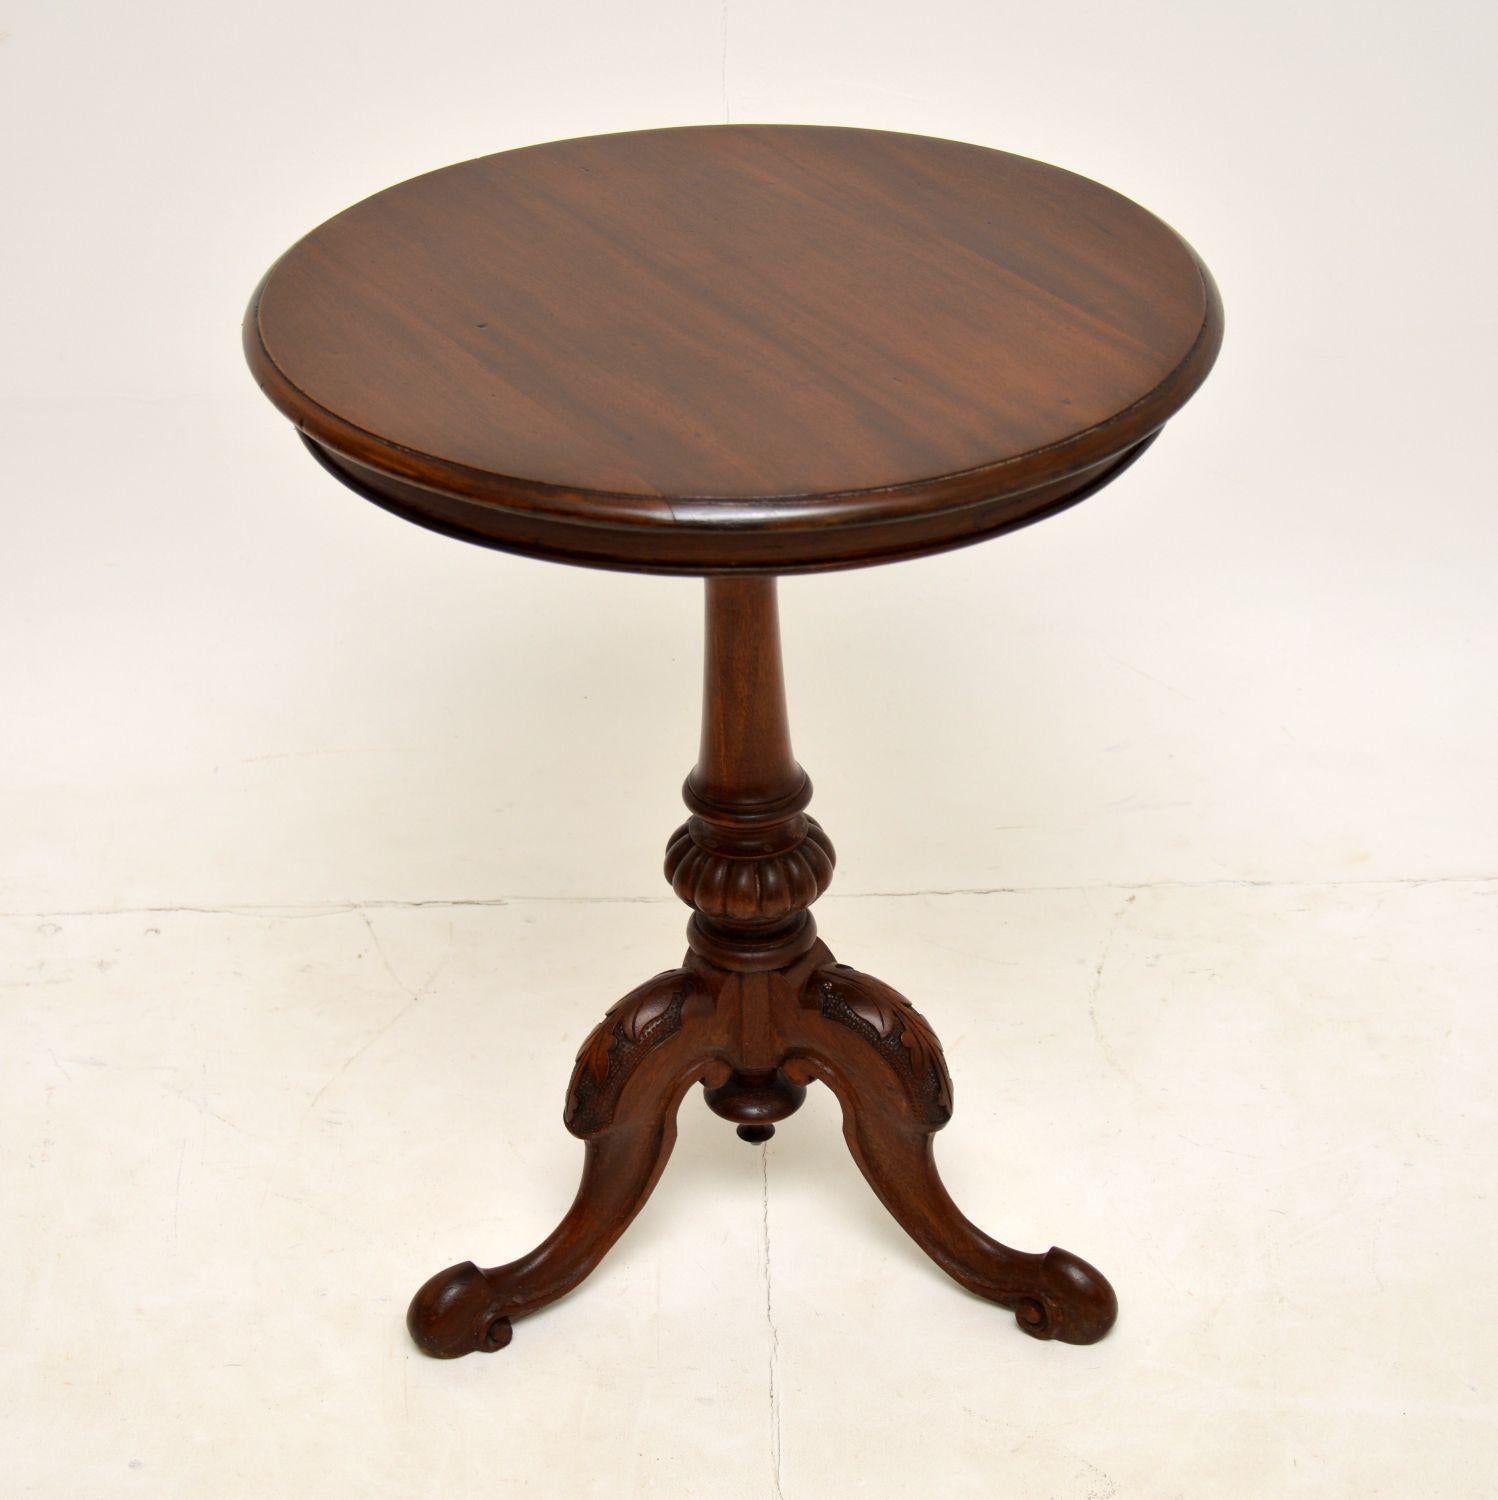 A gorgeous antique Victorian side table in solid mahogany, dating from around the 1860-1880’s period.

It is of superb quality, the tripod base has wonderfully detailed deep carving. The solid mahogany top has a rich colour and beautiful